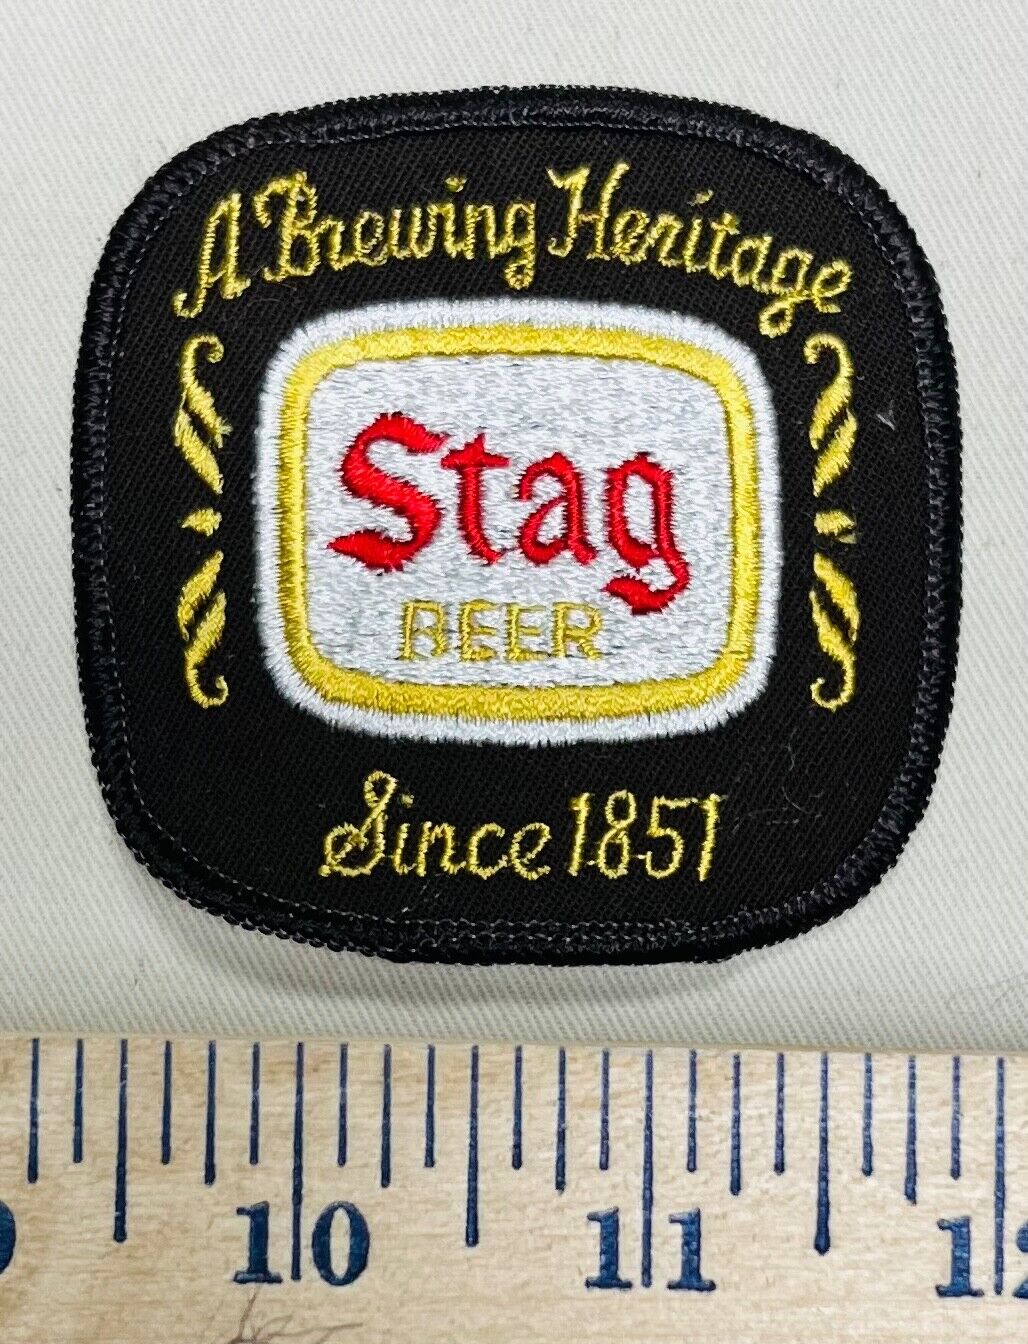 Vintage Embroidered “A Brewing Heritage Since 1851”Stag Beer Patch 3 X 3 1/2”.